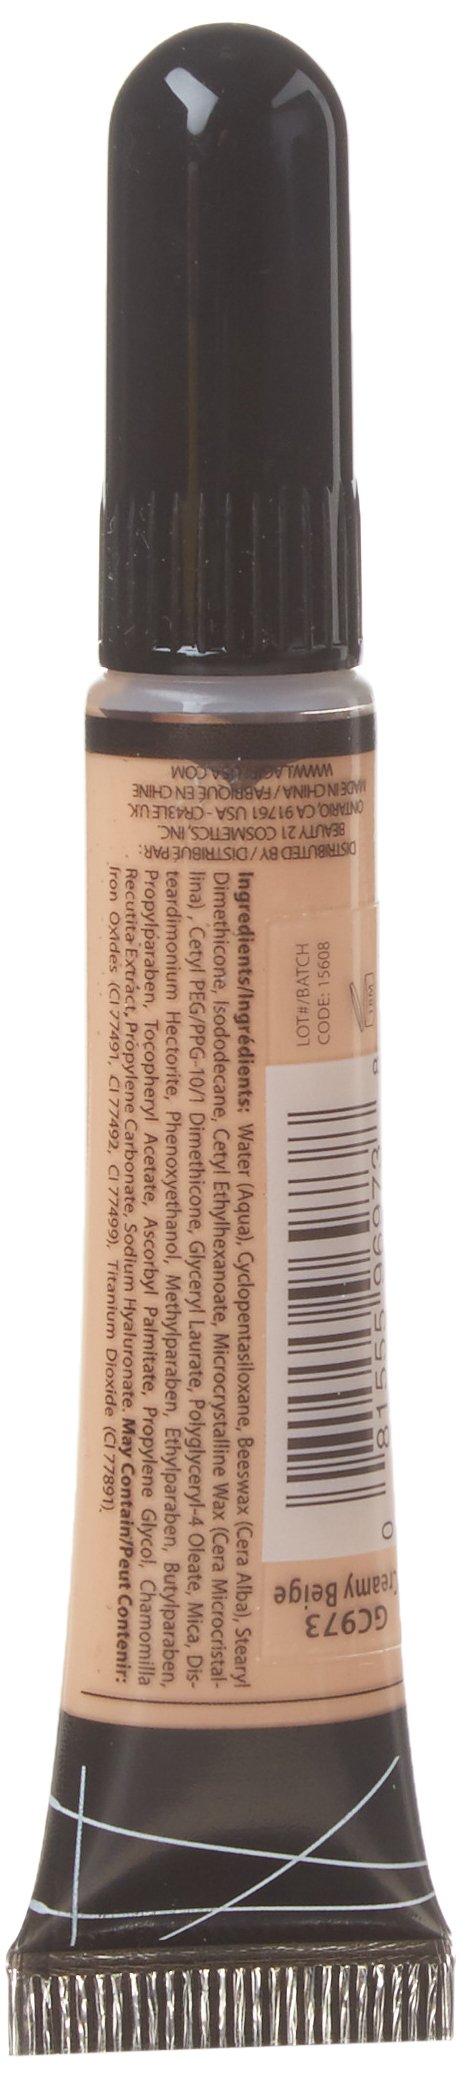 L.A. Girl Pro Conceal HD Concealer, Creamy Beige, 0.28 Ounce